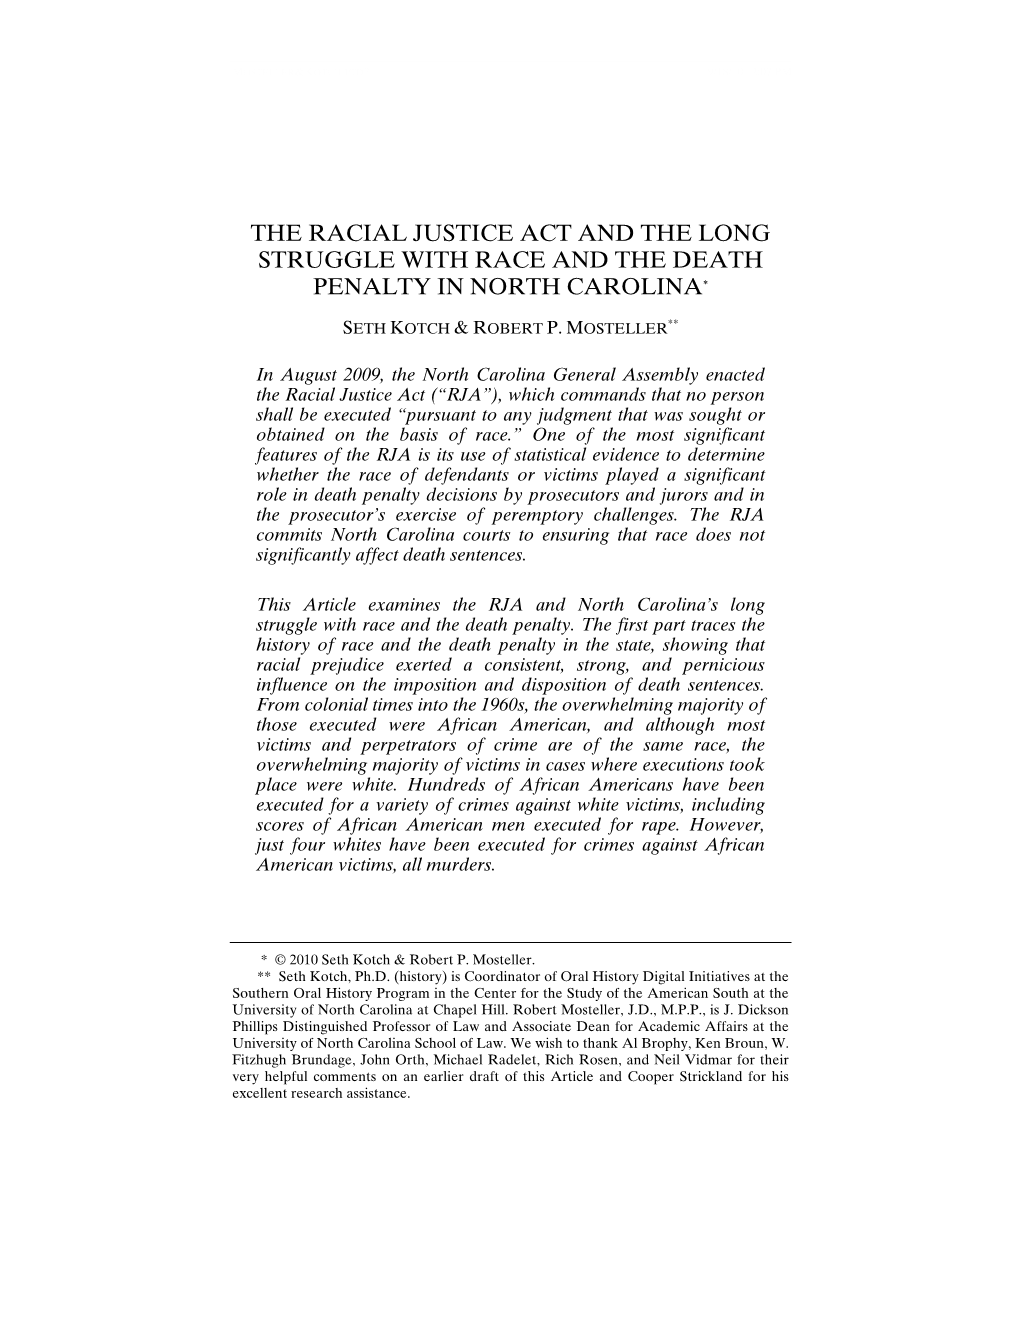 The Racial Justice Act and the Long Struggle with Race and the Death Penalty in North Carolina*